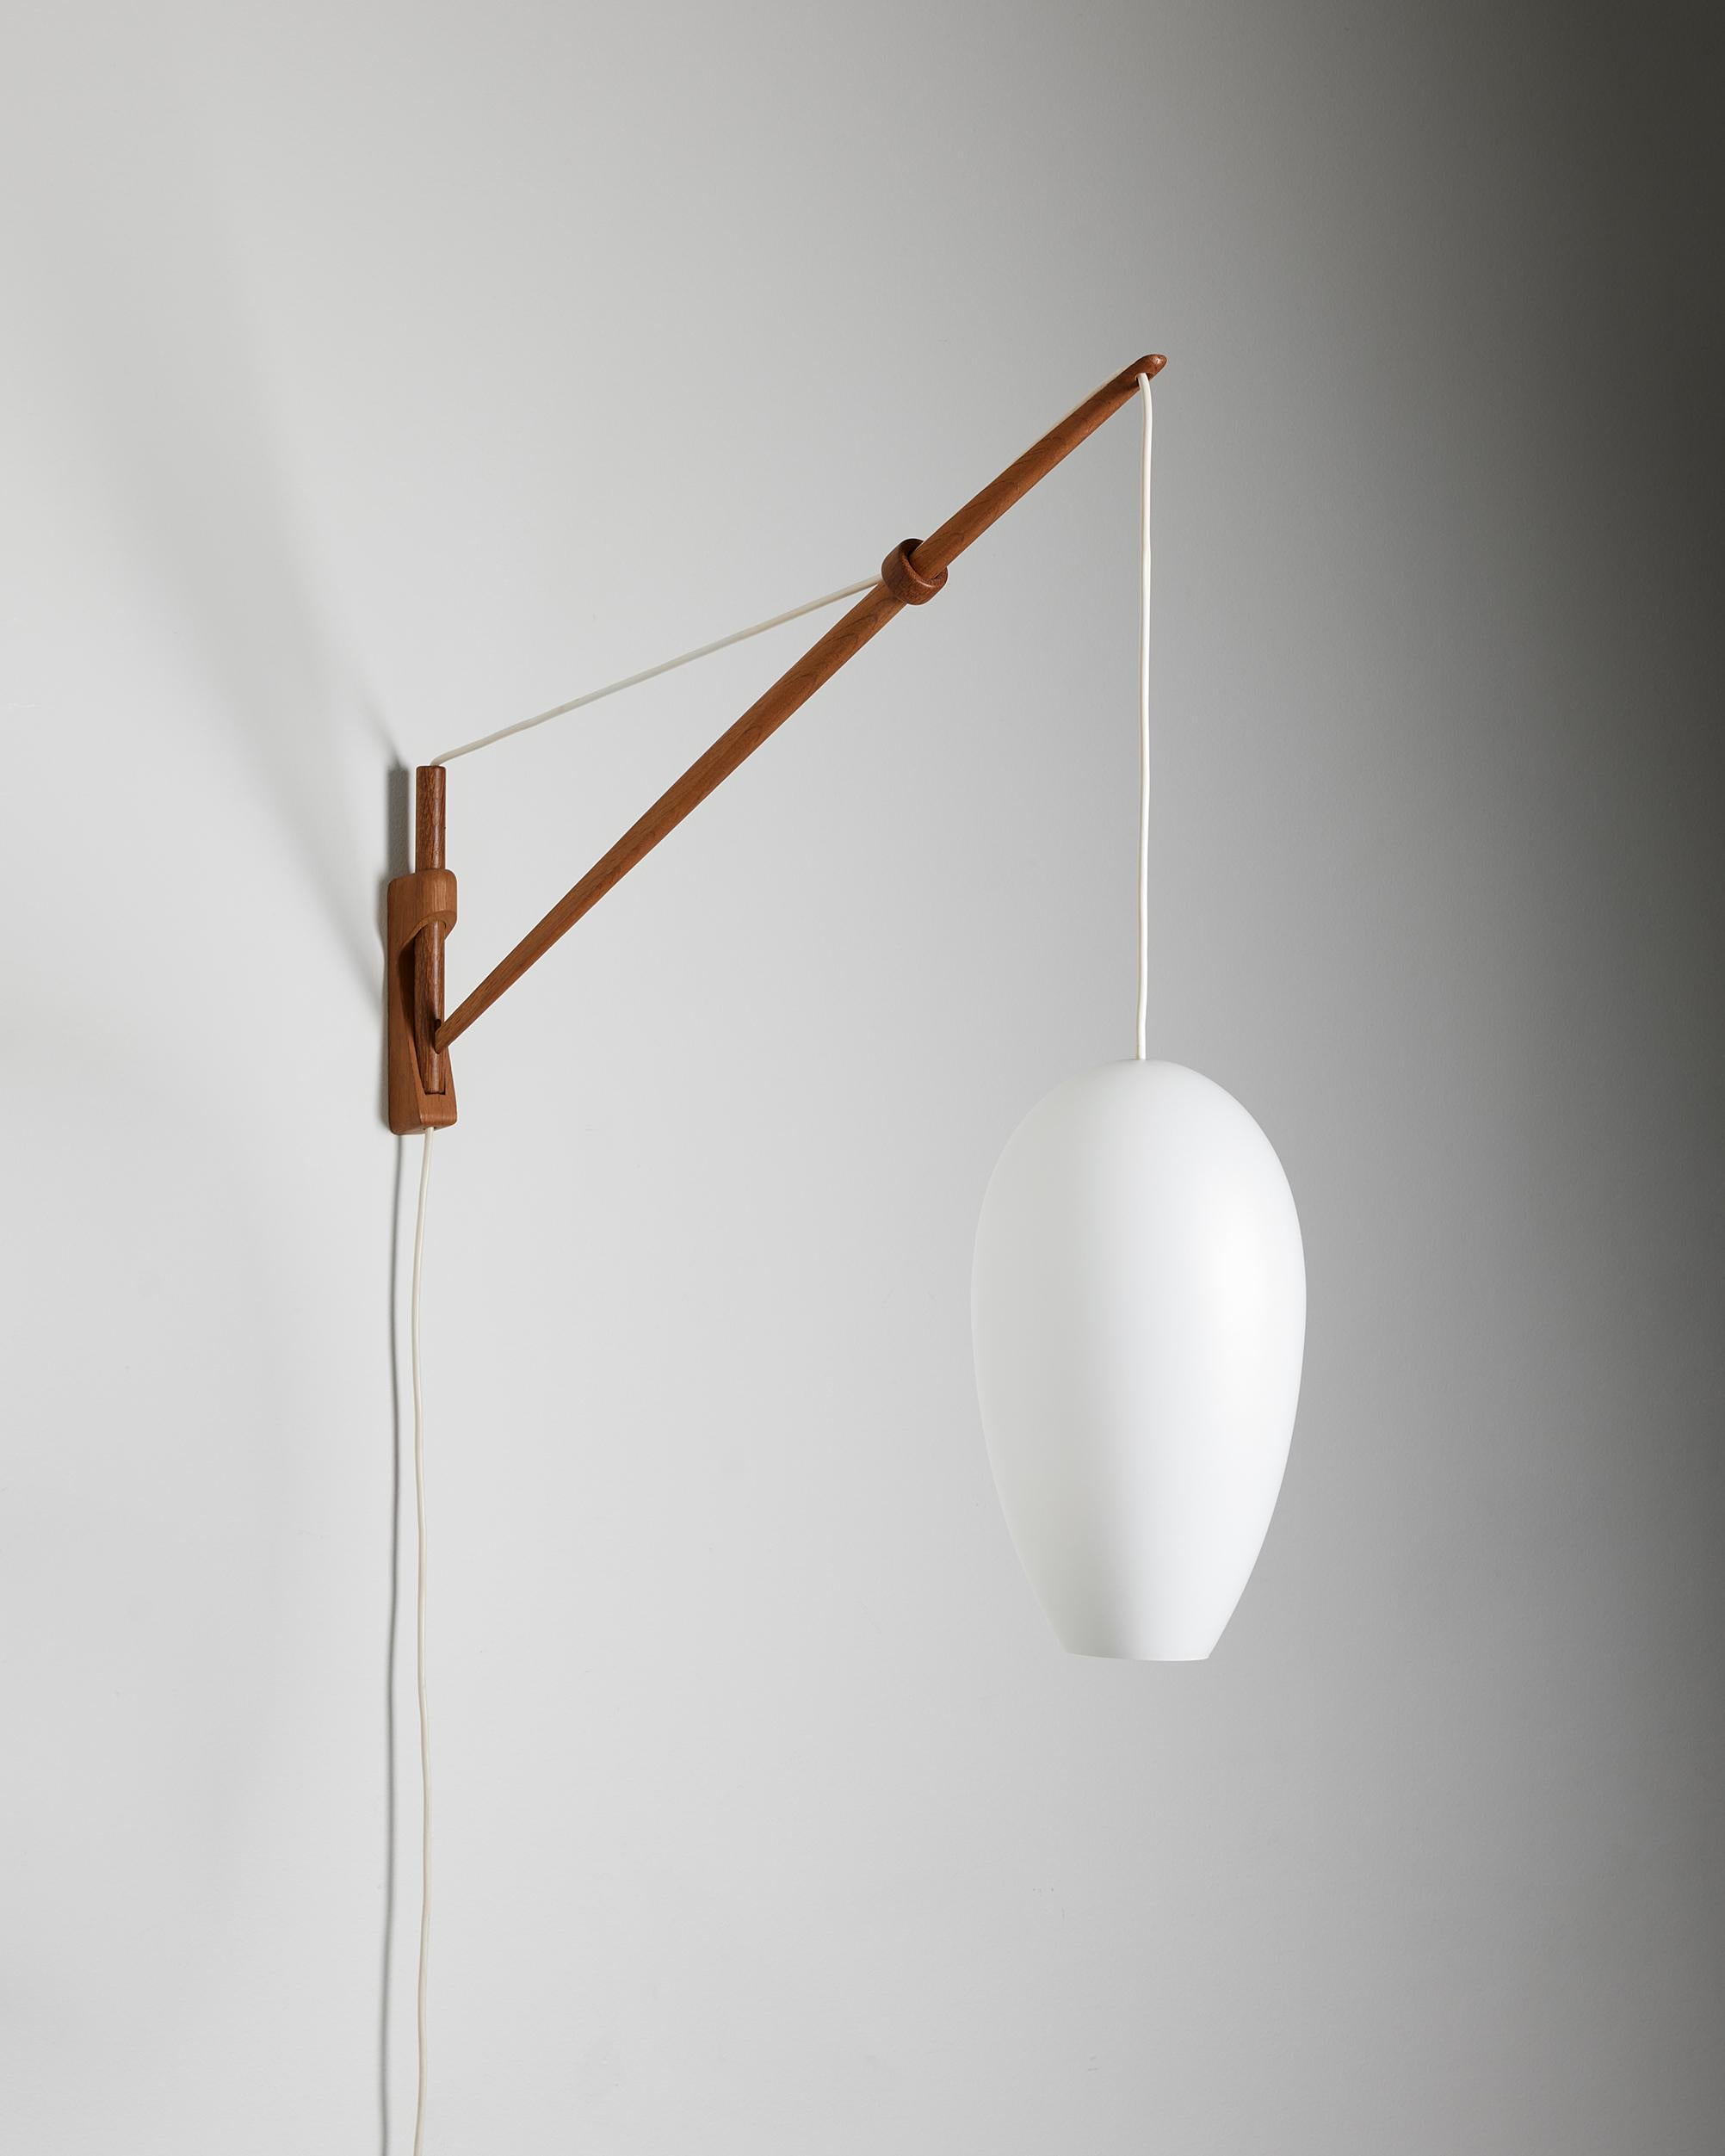 Wall lamp designed by A. Bank Jensen and Kjeld Iversen for Louis Poulsen,
Denmark, 1950s.

Oak and opal glass.

Adjustable drop height.
H: 75 cm
Height of the shade: 32 cm
Diameter of the bottom of the shade: 8 cm
Depth: 79